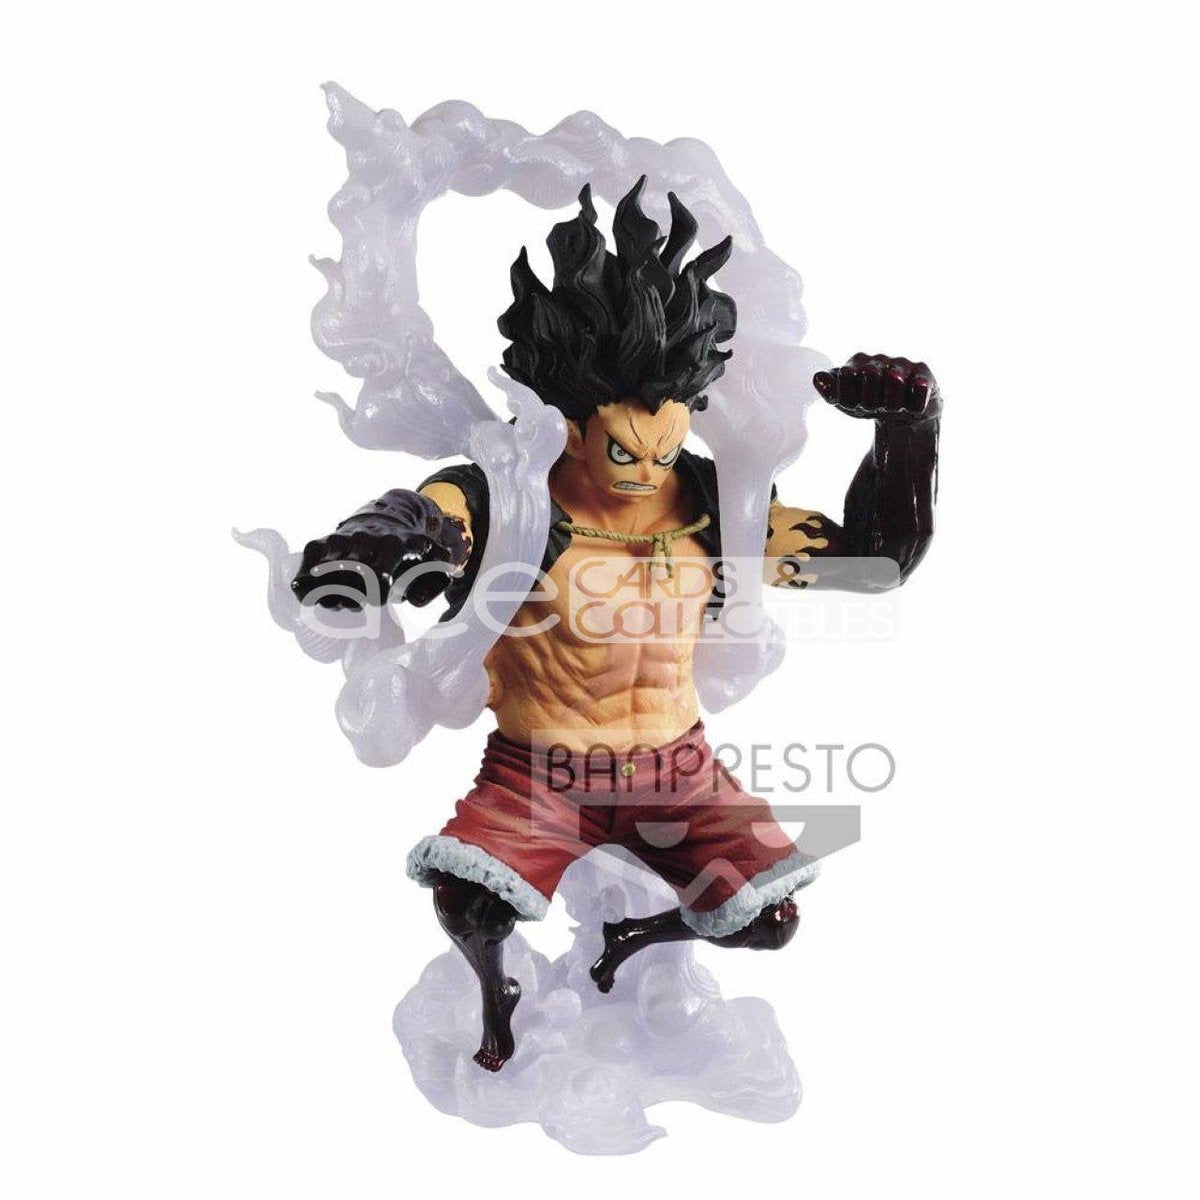 One Piece &quot;Monkey D. Luffy&quot; (Ver. B) King of Artist Gear4 [Special]-Bandai-Ace Cards &amp; Collectibles